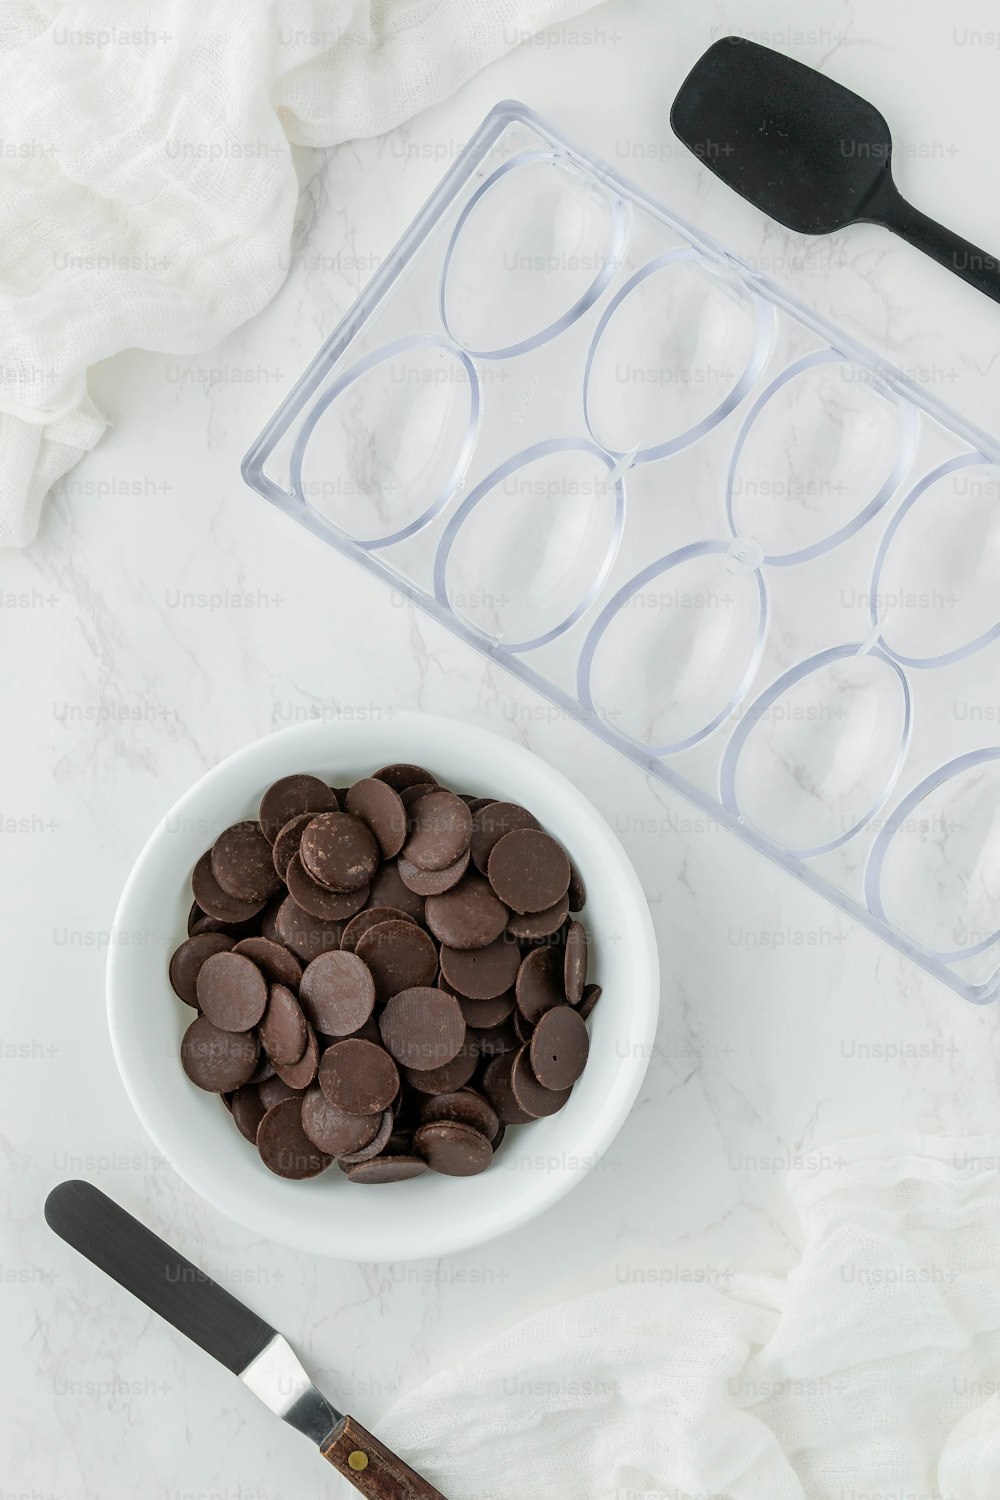 a bowl of chocolate chips next to an ice tray